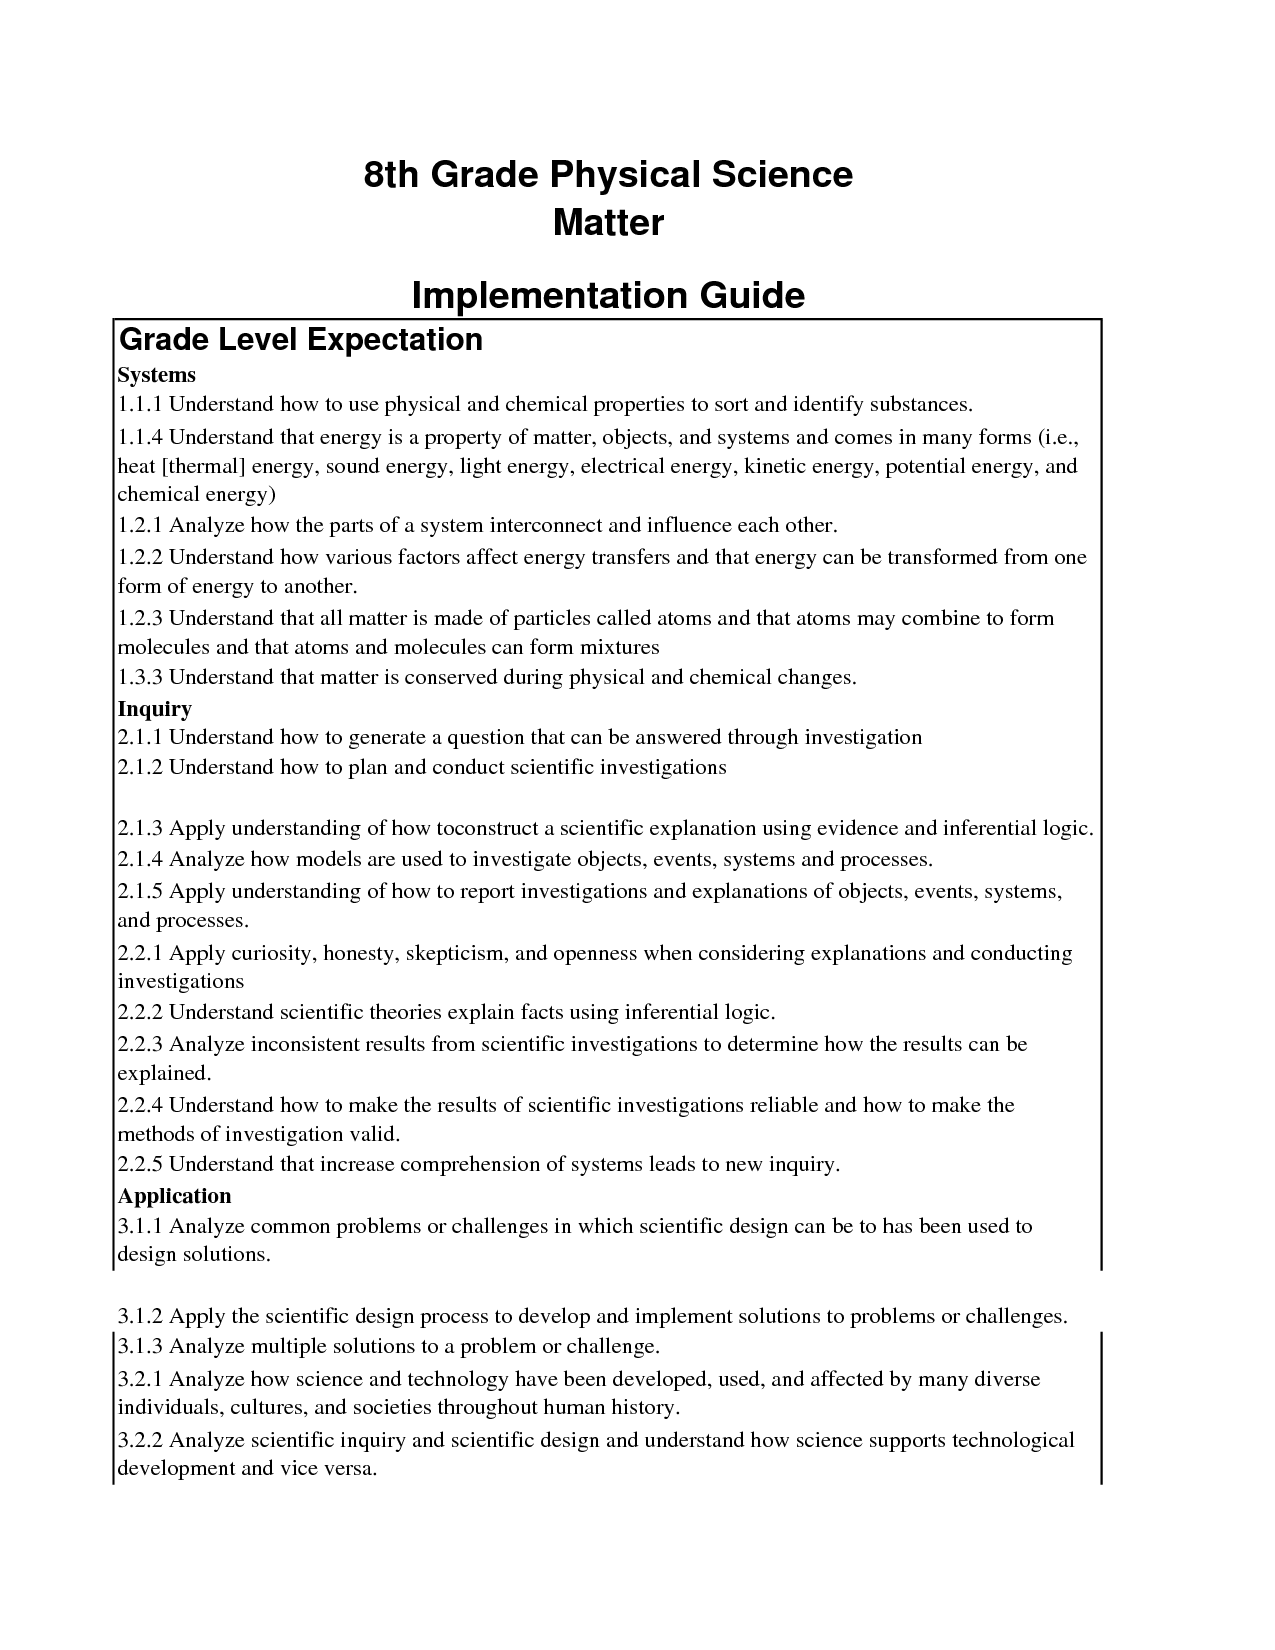 7-best-images-of-8th-grade-physical-science-worksheets-8th-grade